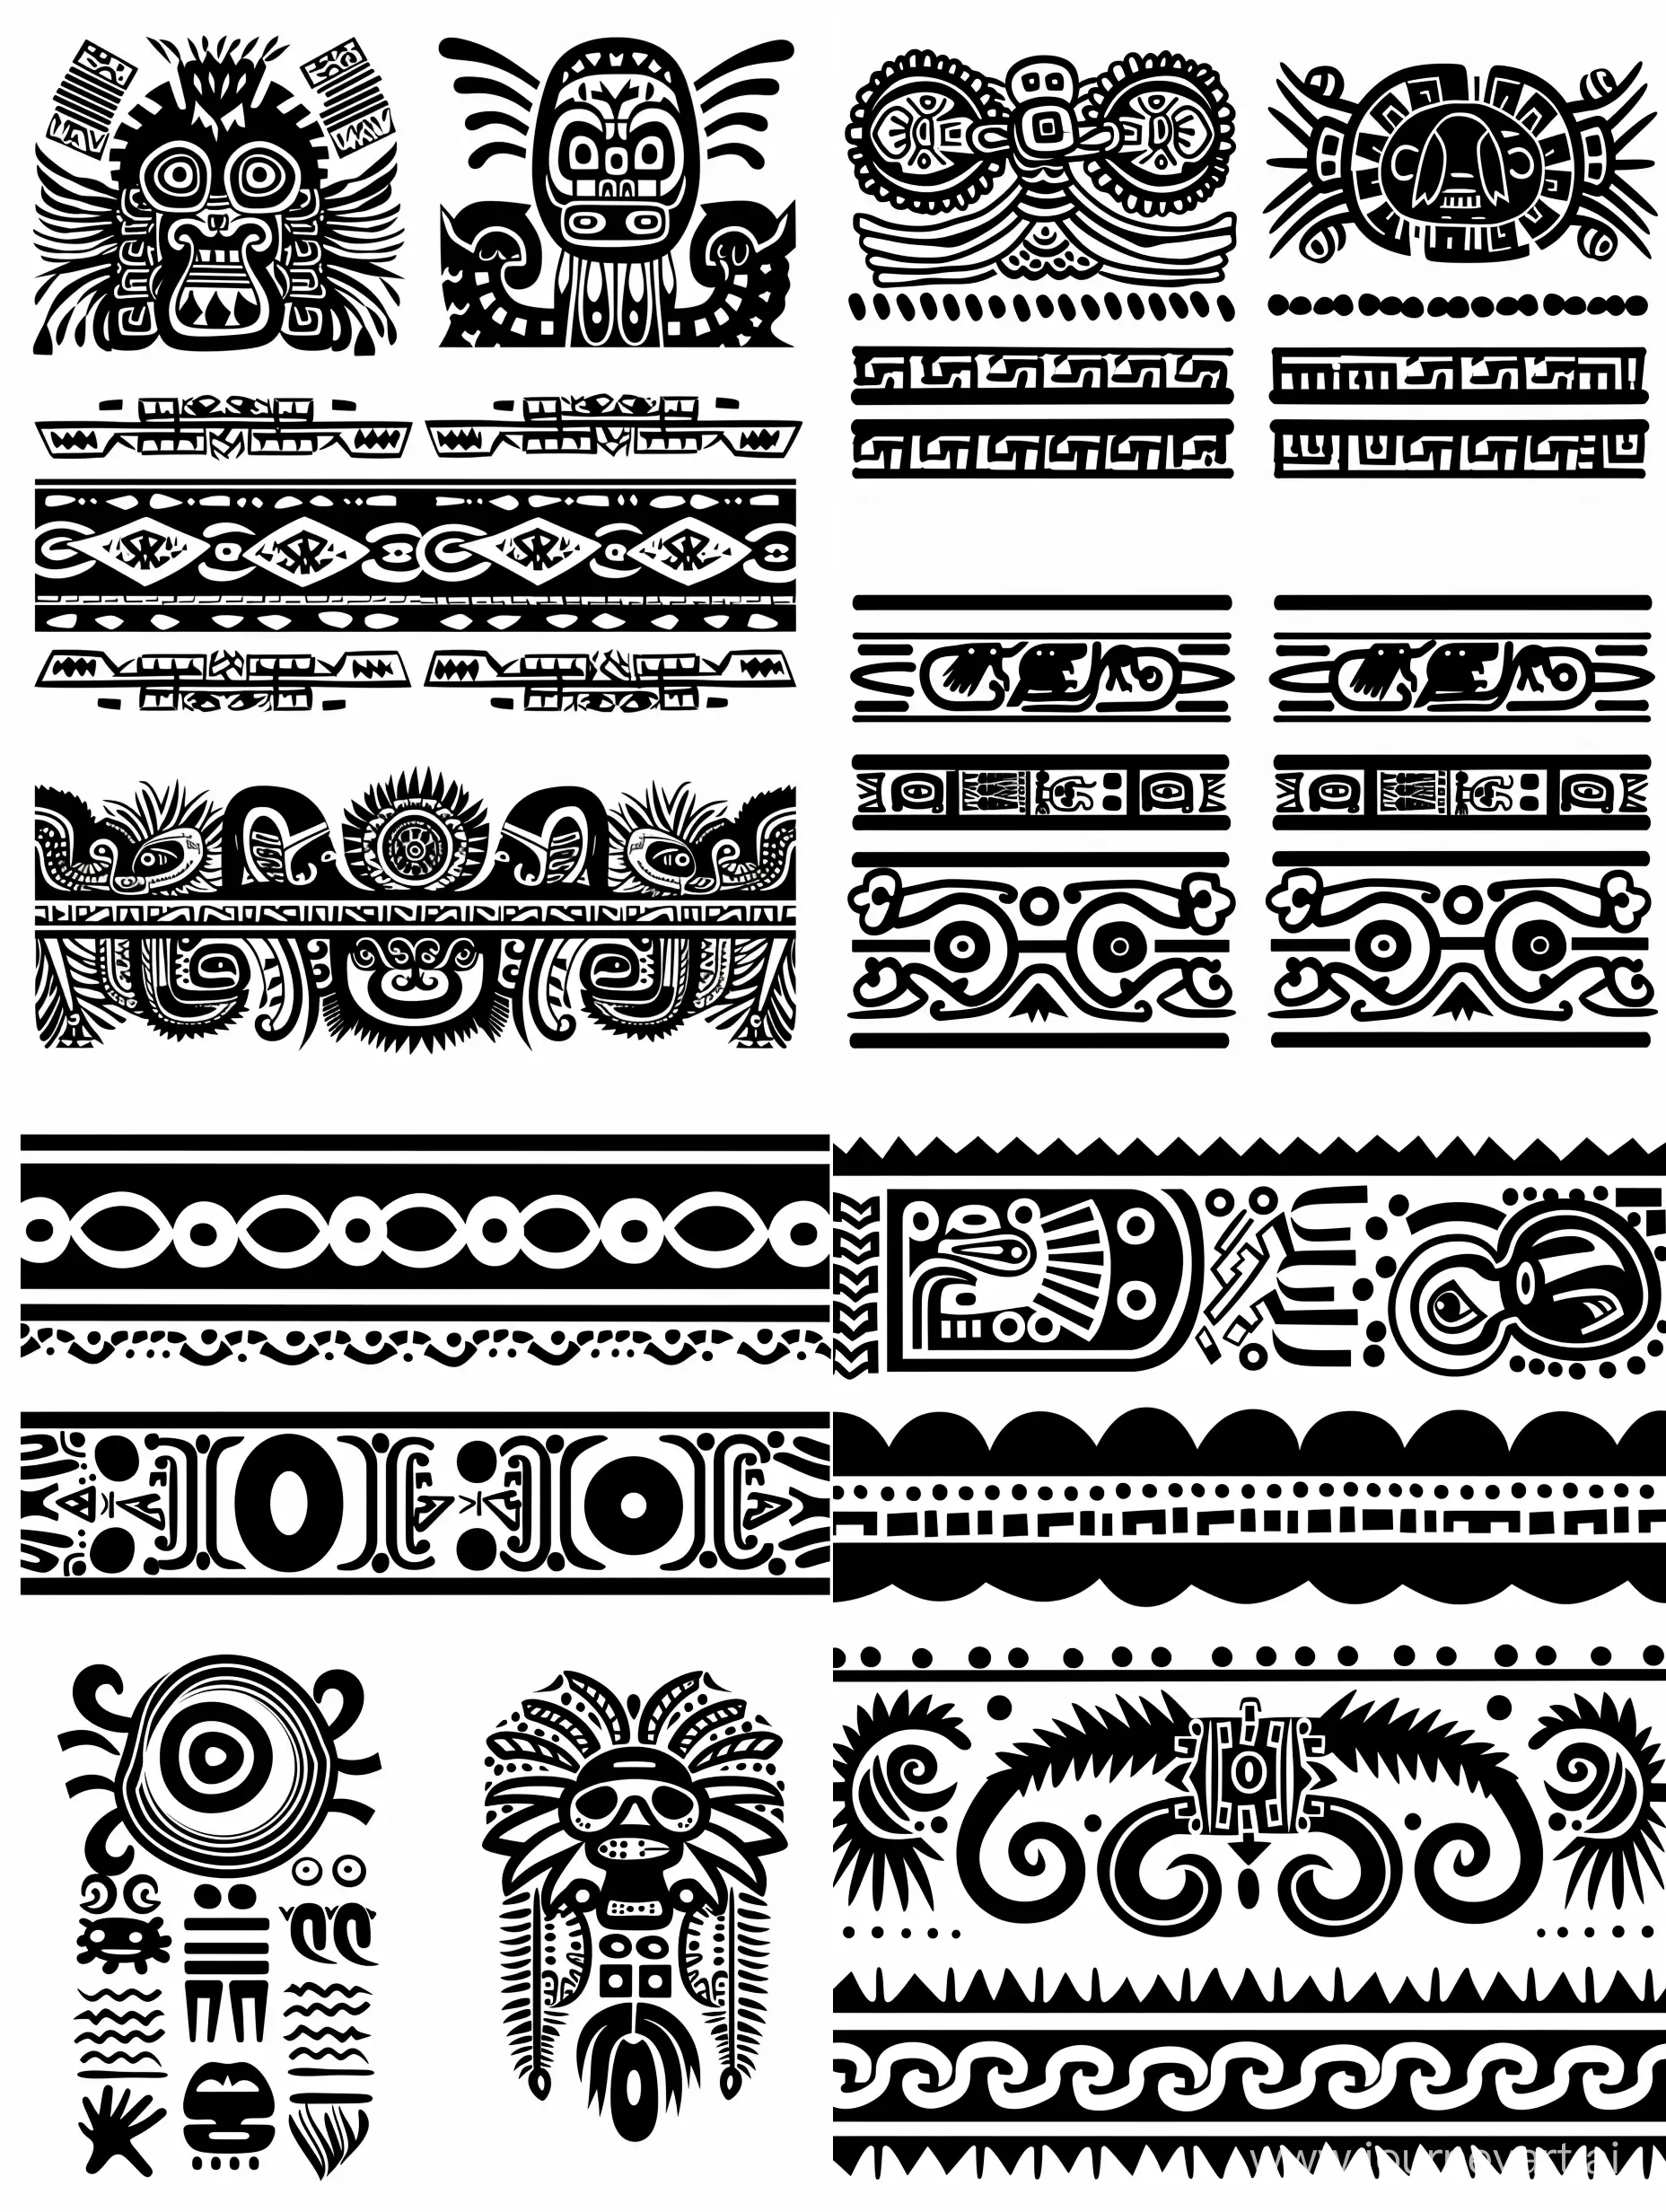 Four variants of the ancient Aztec ornament with a horizontal stripe, vector, linear, many details, stylized caricature, black on a white background, decorative, flat drawing